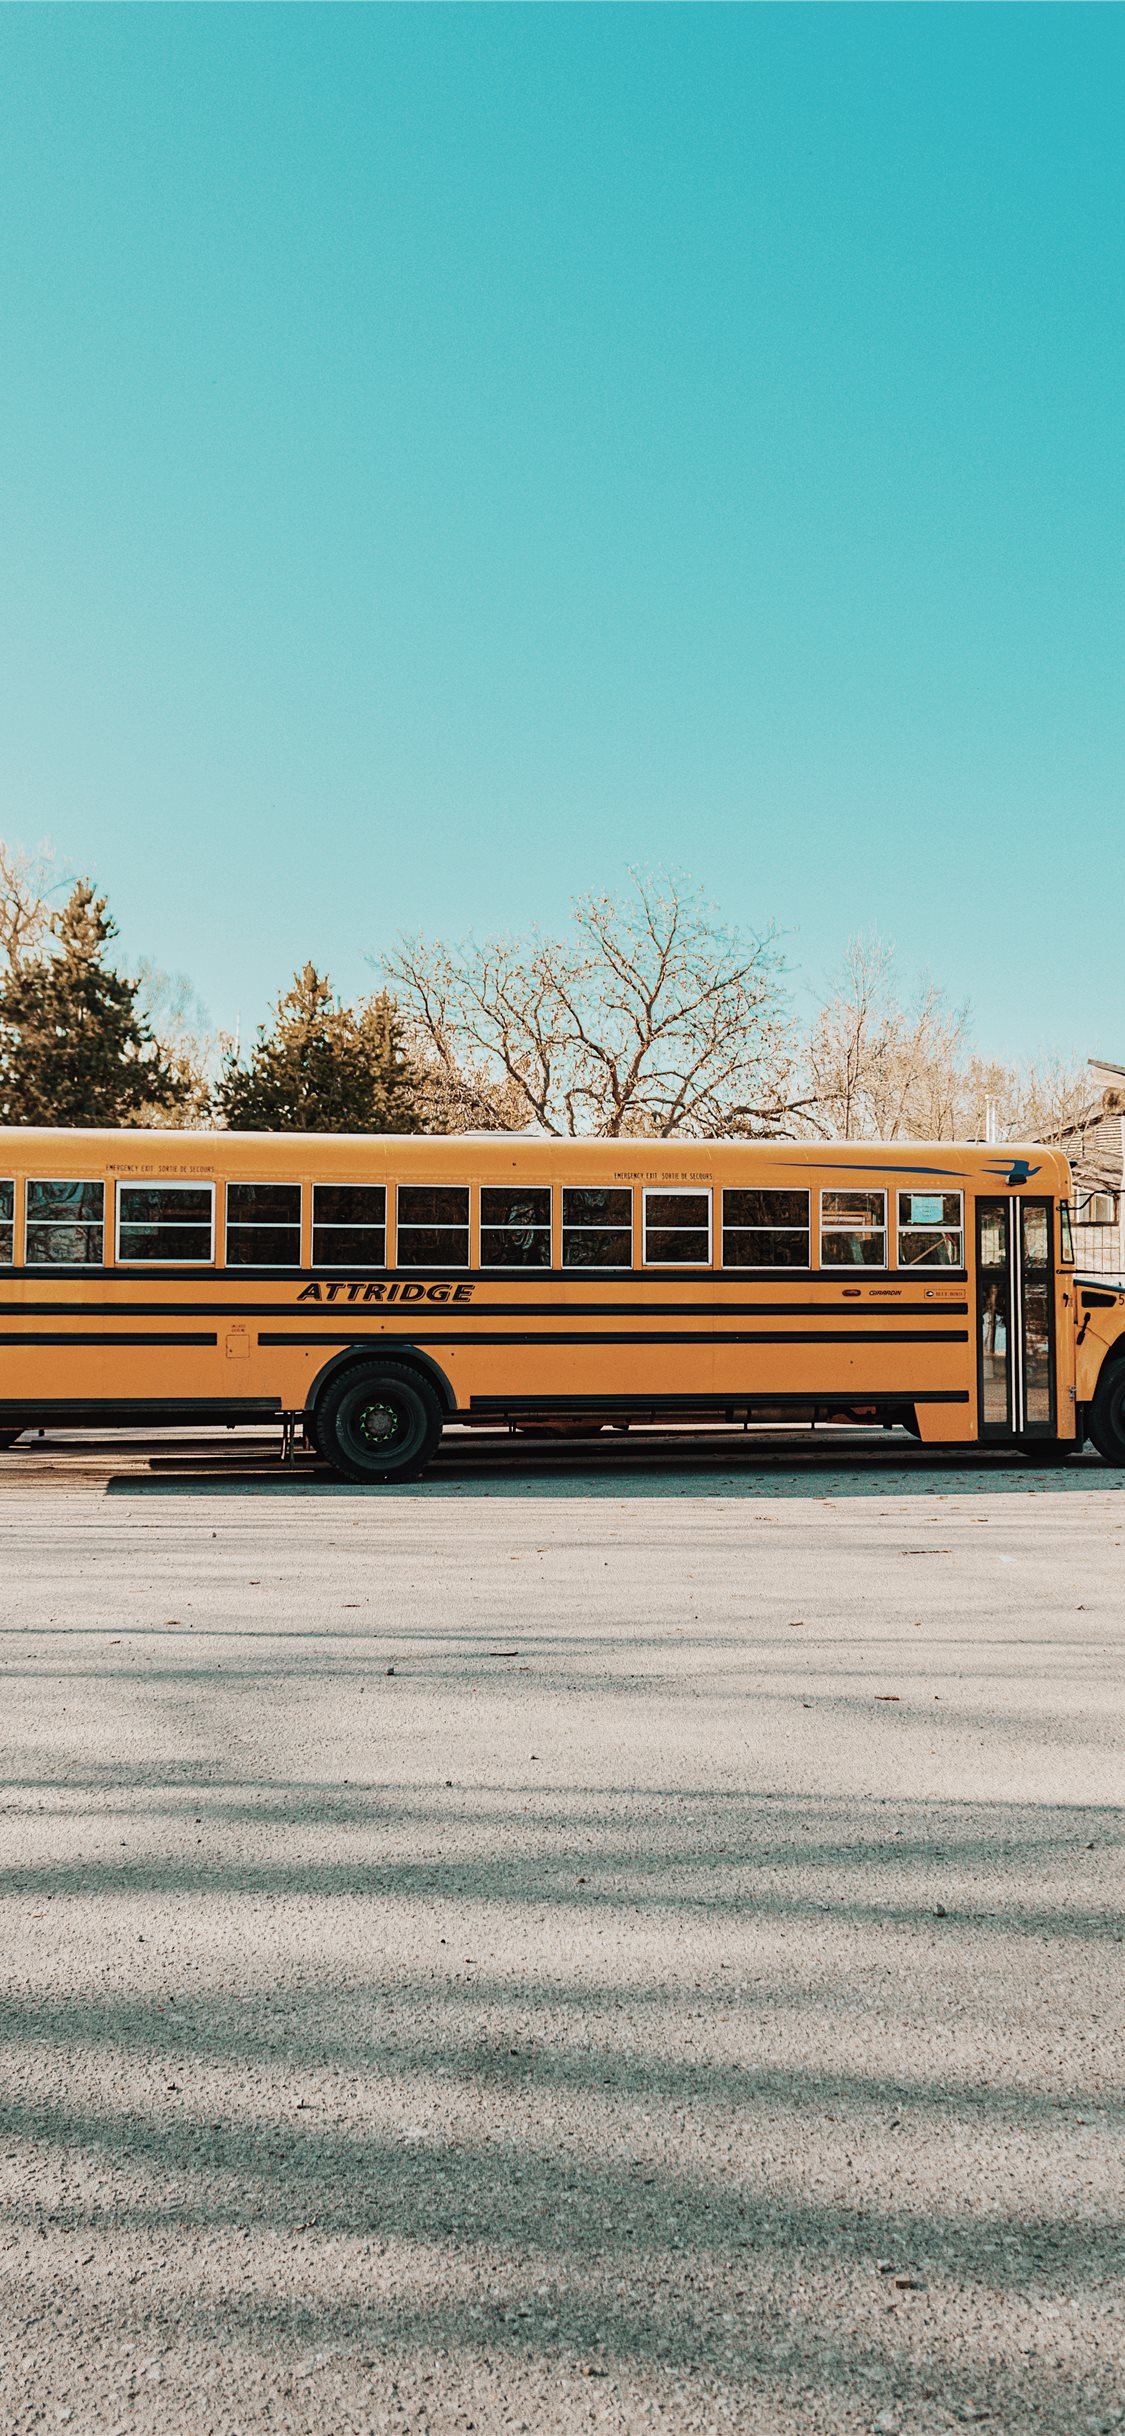 A yellow school bus parked in the street - School